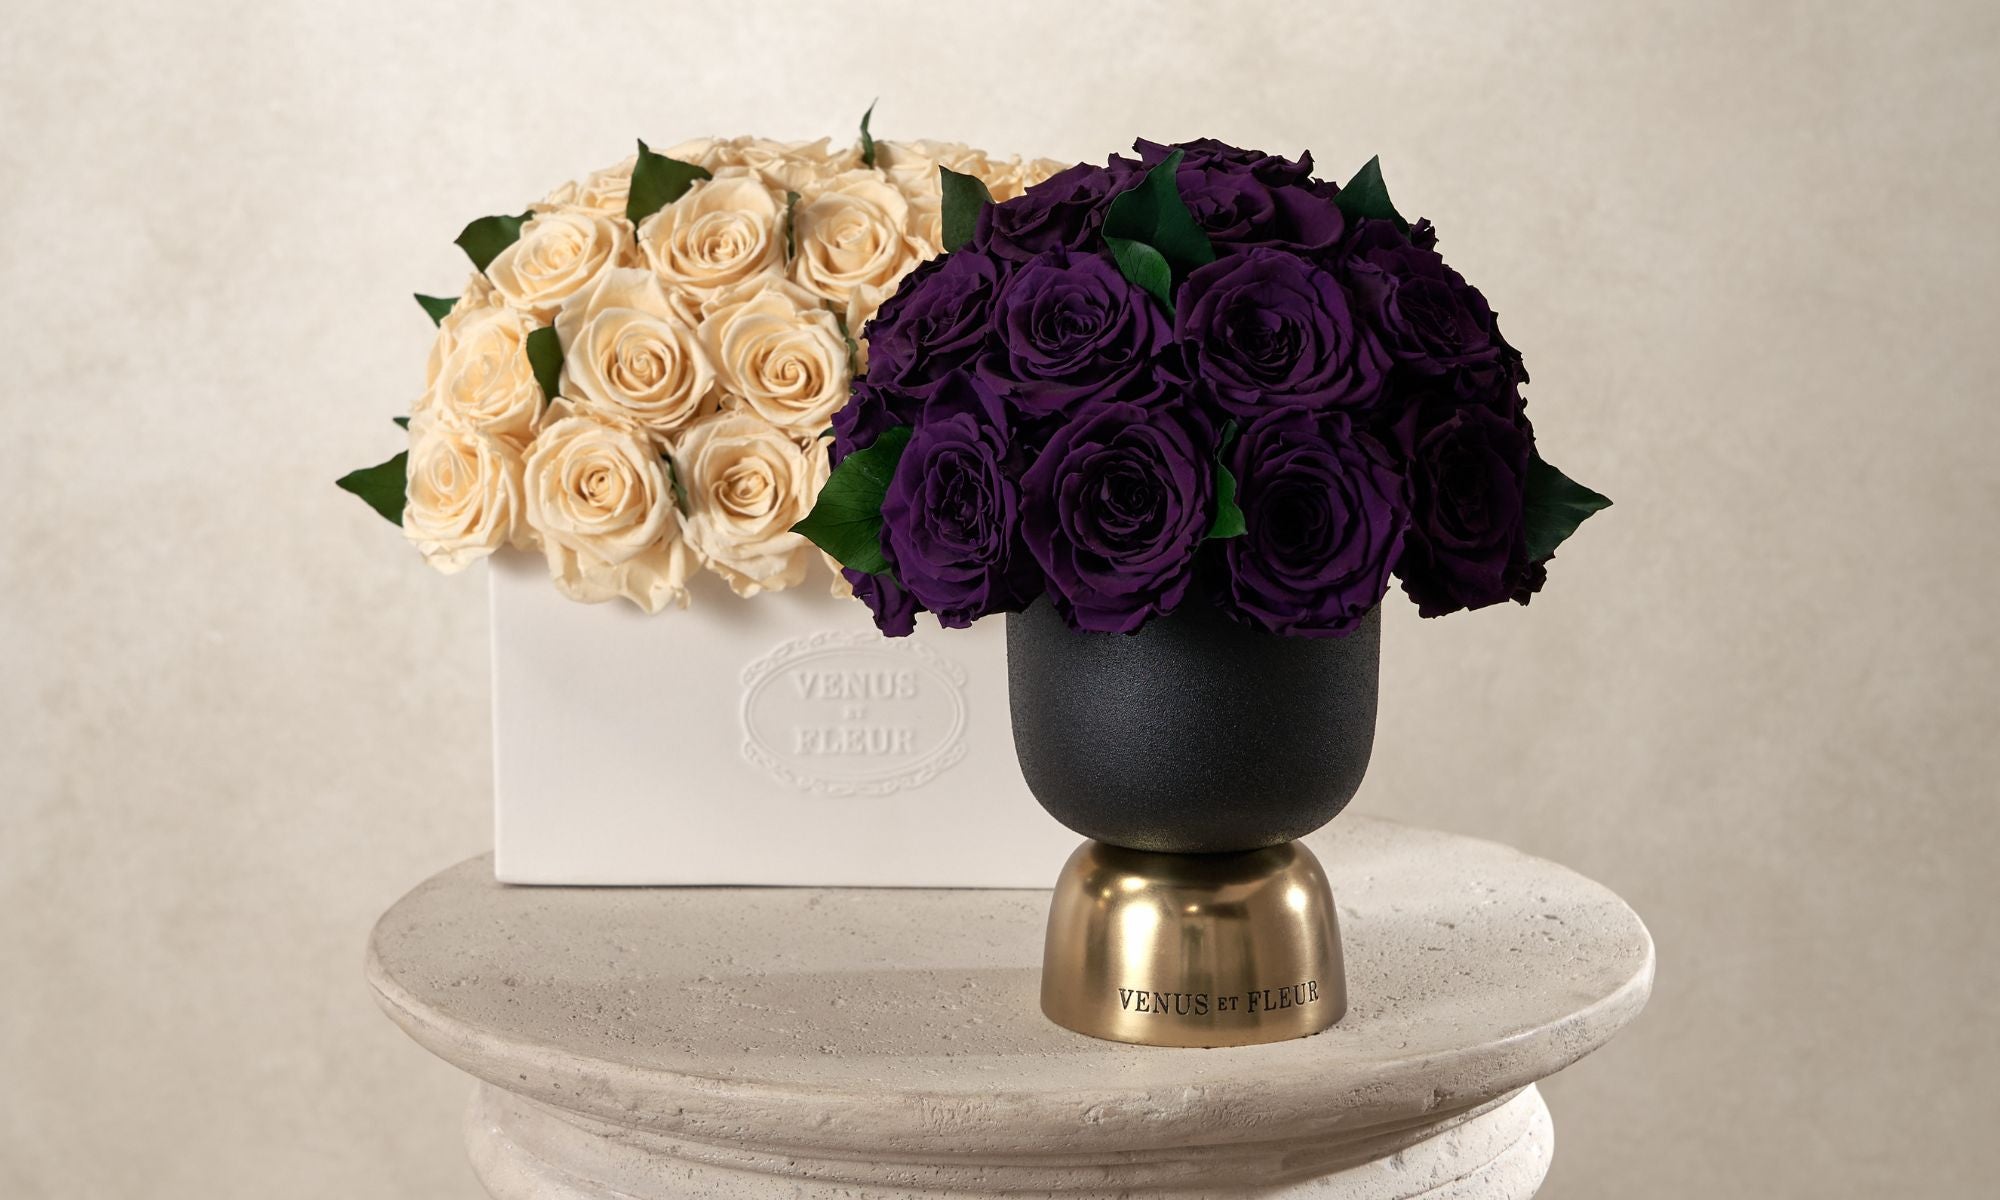 What To Expect From A Venus et Fleur® Flower Delivery